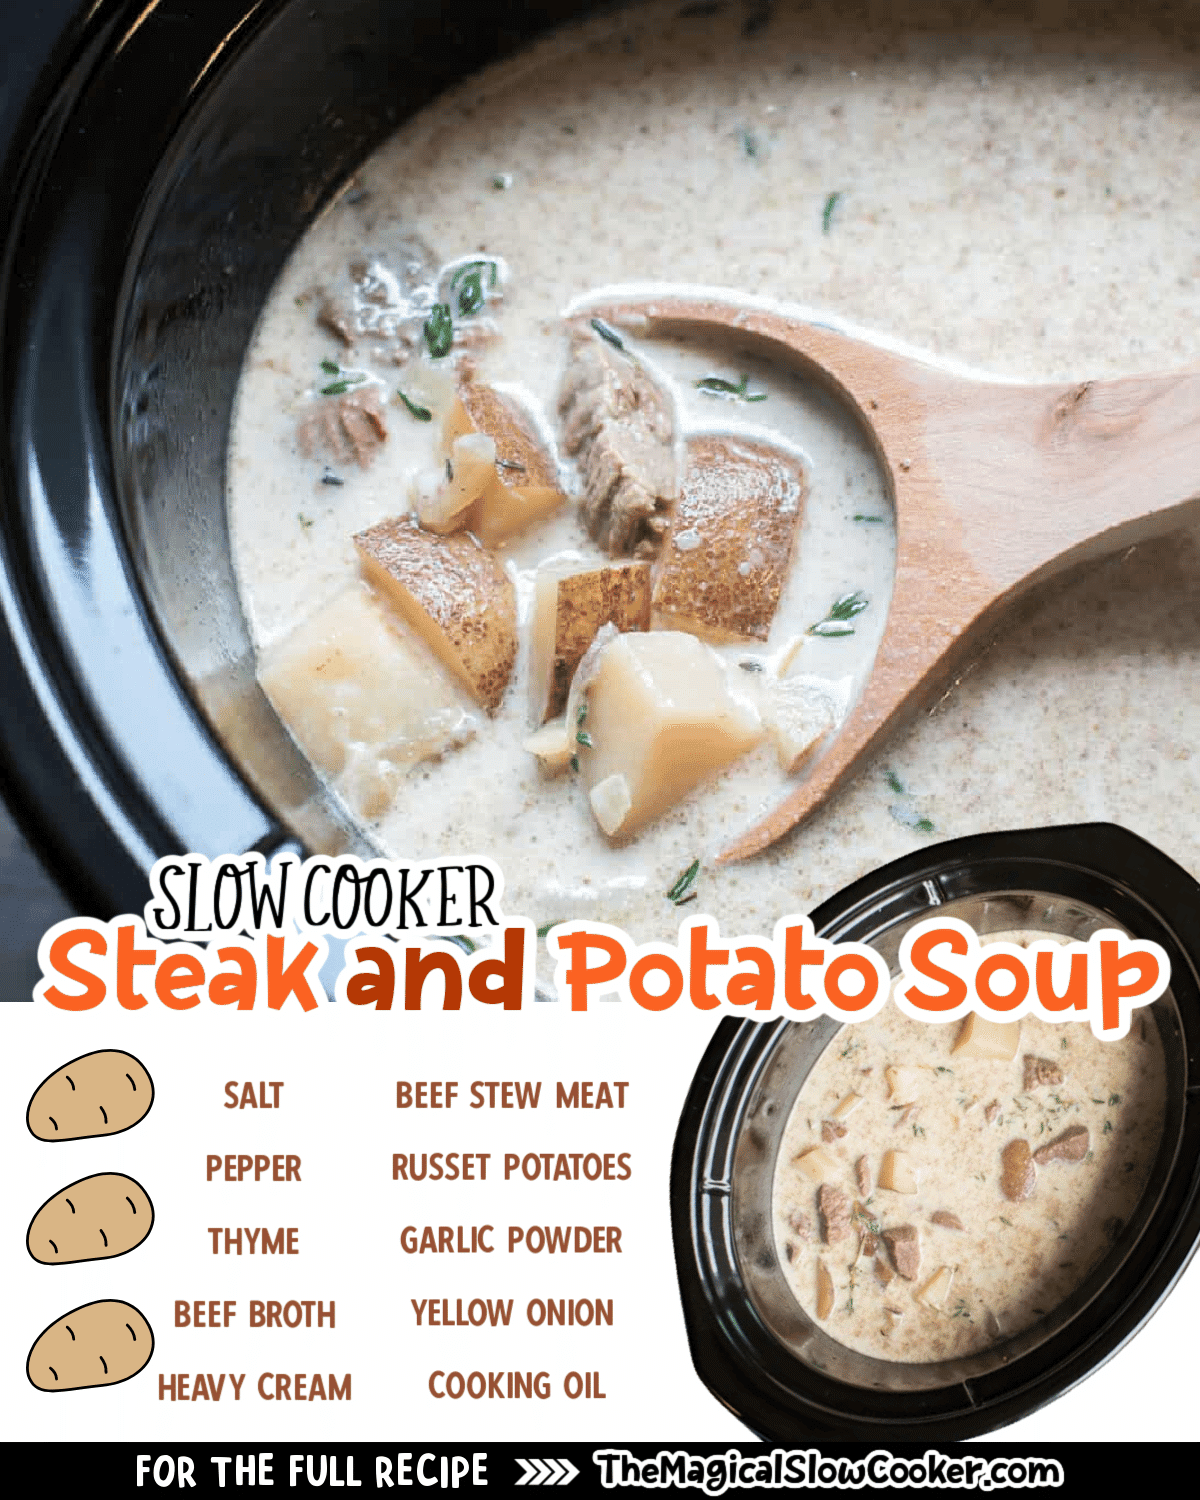 Images of steak and potato soup with text overlay of what the ingredients are.